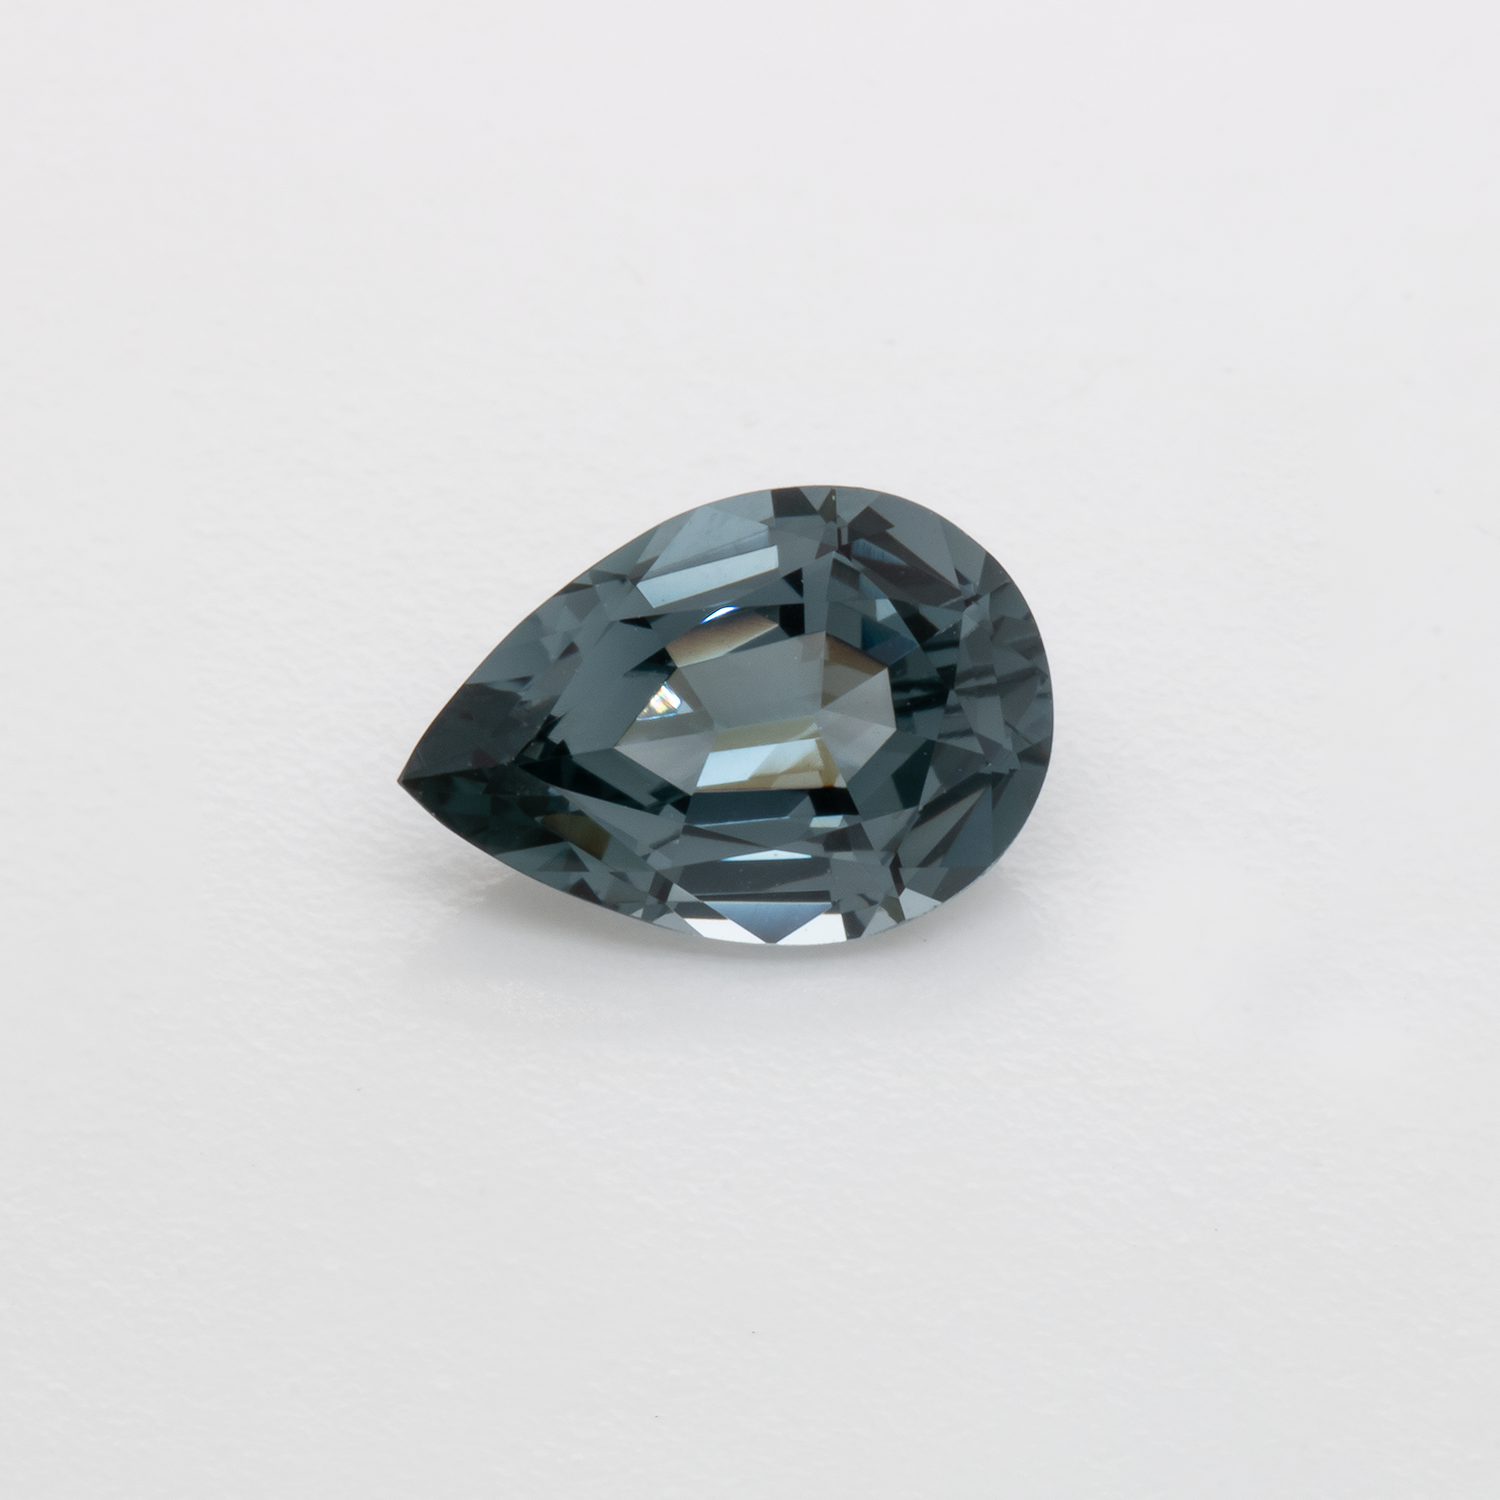 Spinel - grey, pearshape, 9.3x6.5 mm, 1.60 cts, No. SP90046